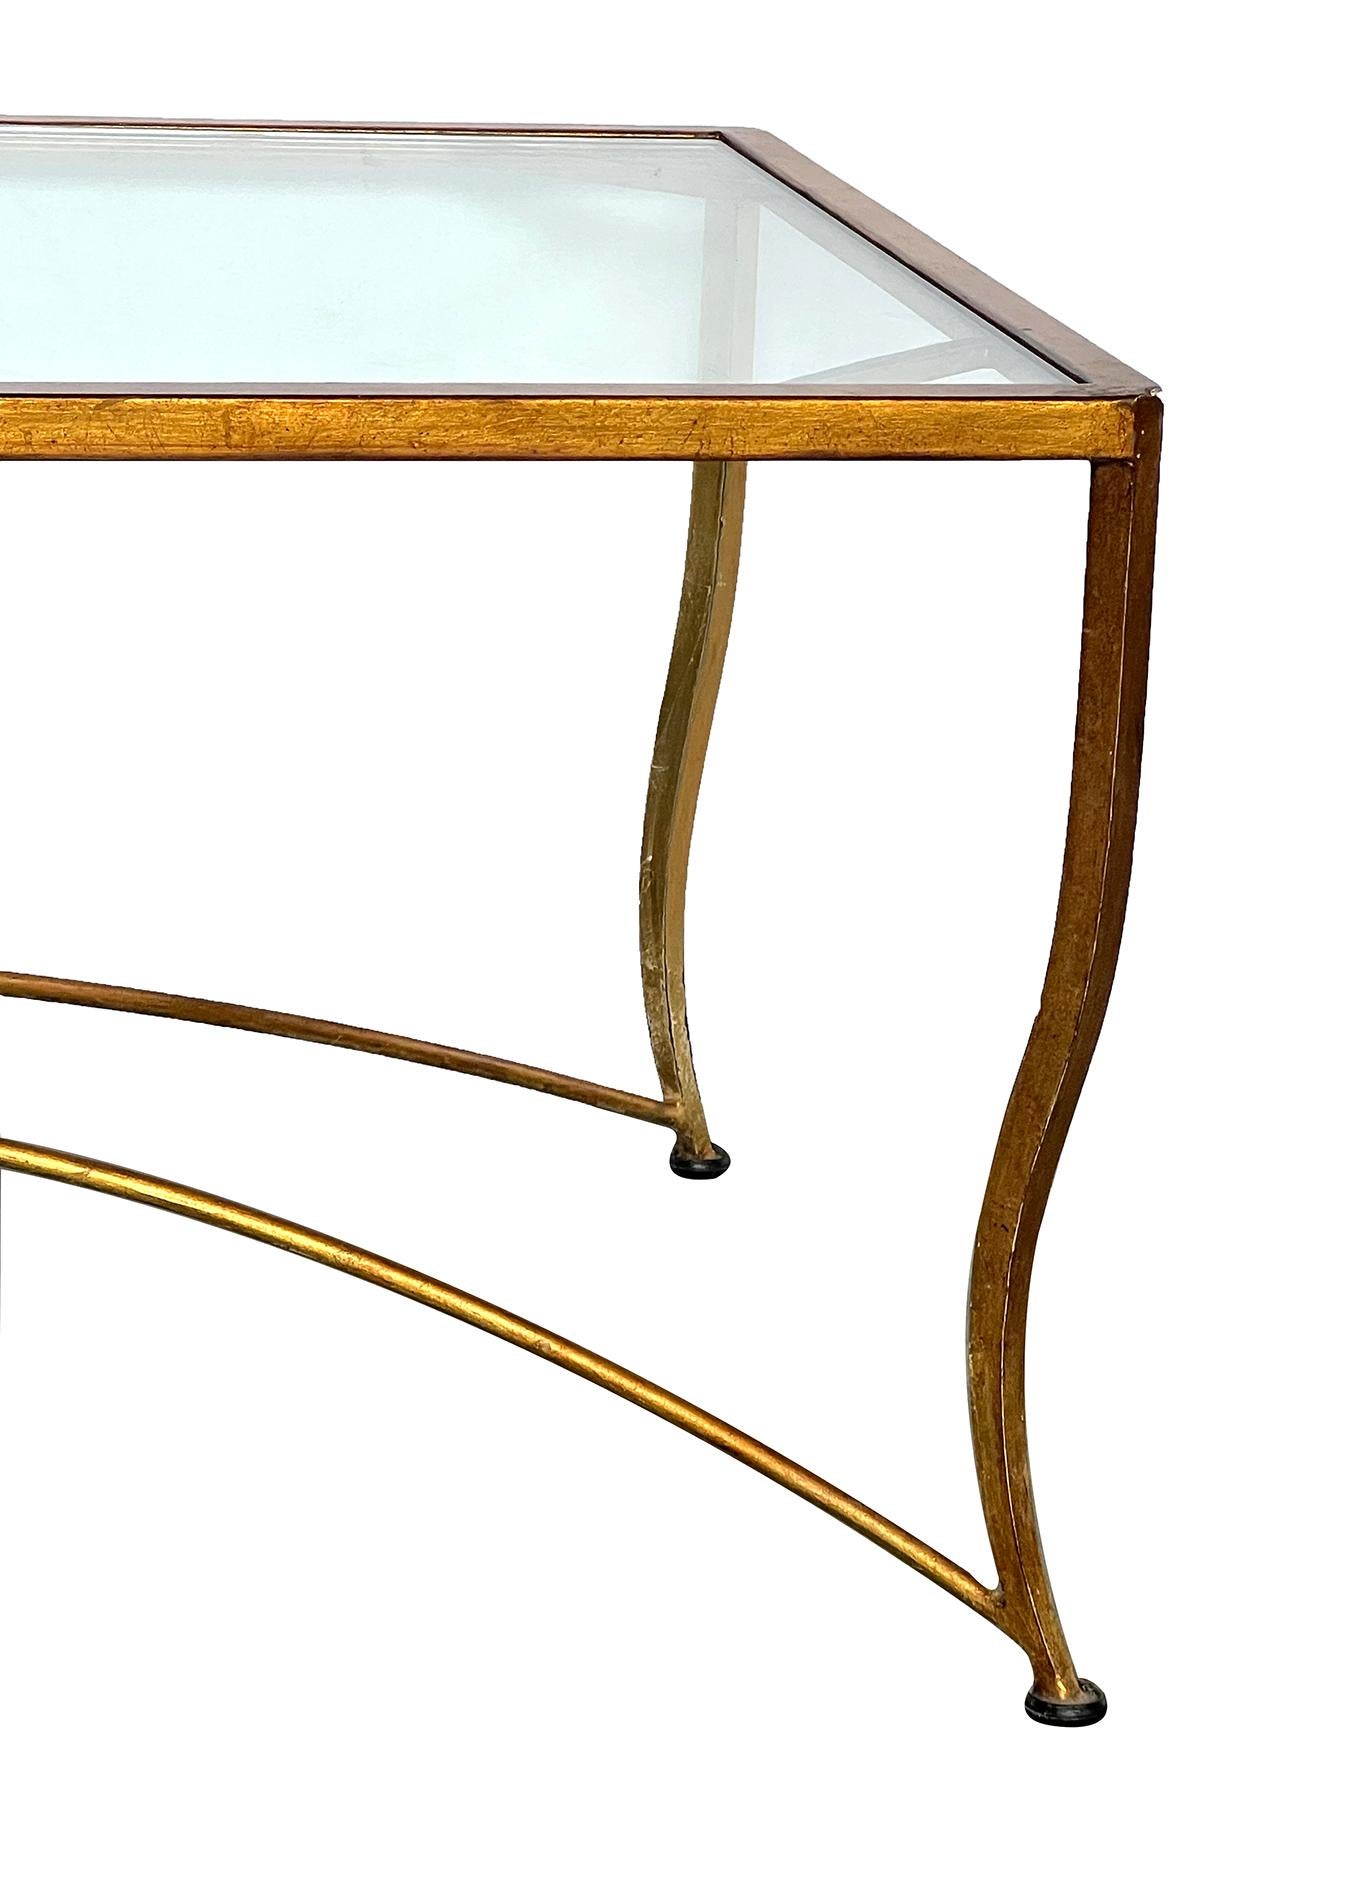 Mid-20th Century A Shapely Italian 1960s Gilt-iron Rectangular Coffee Table with Glass Top For Sale